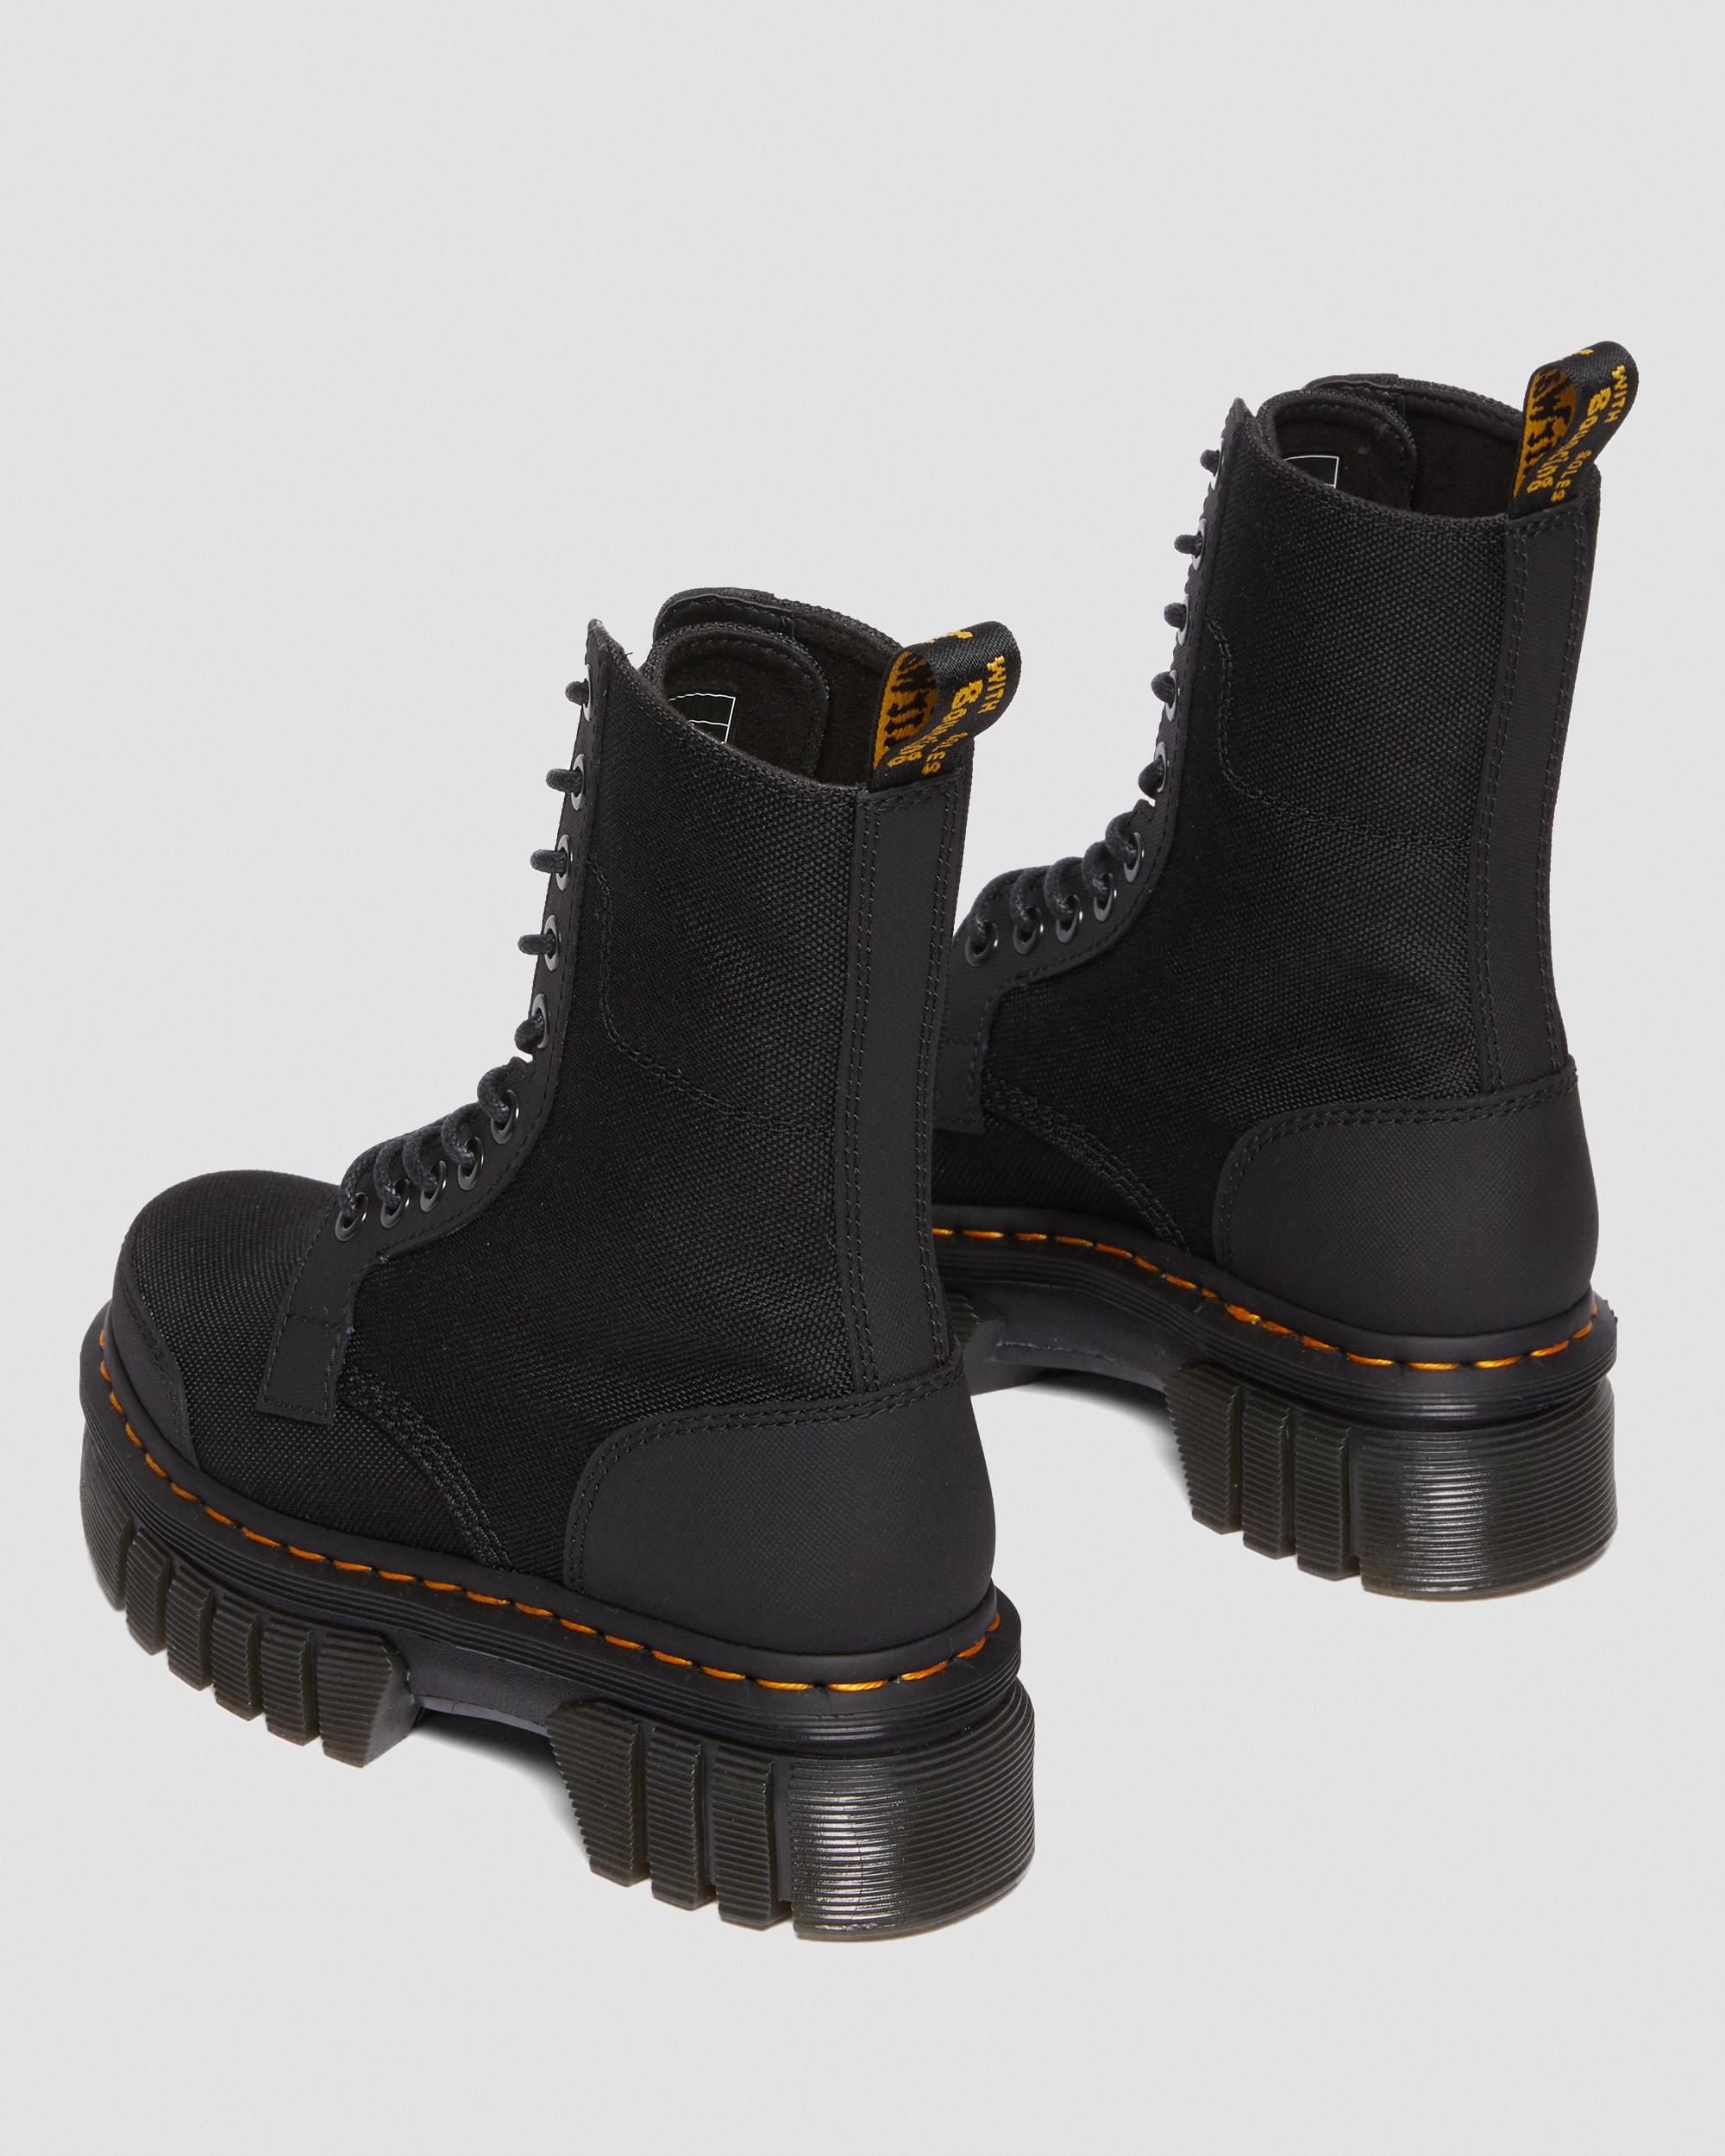 Audrick 10-eye synthetic leather platform boots